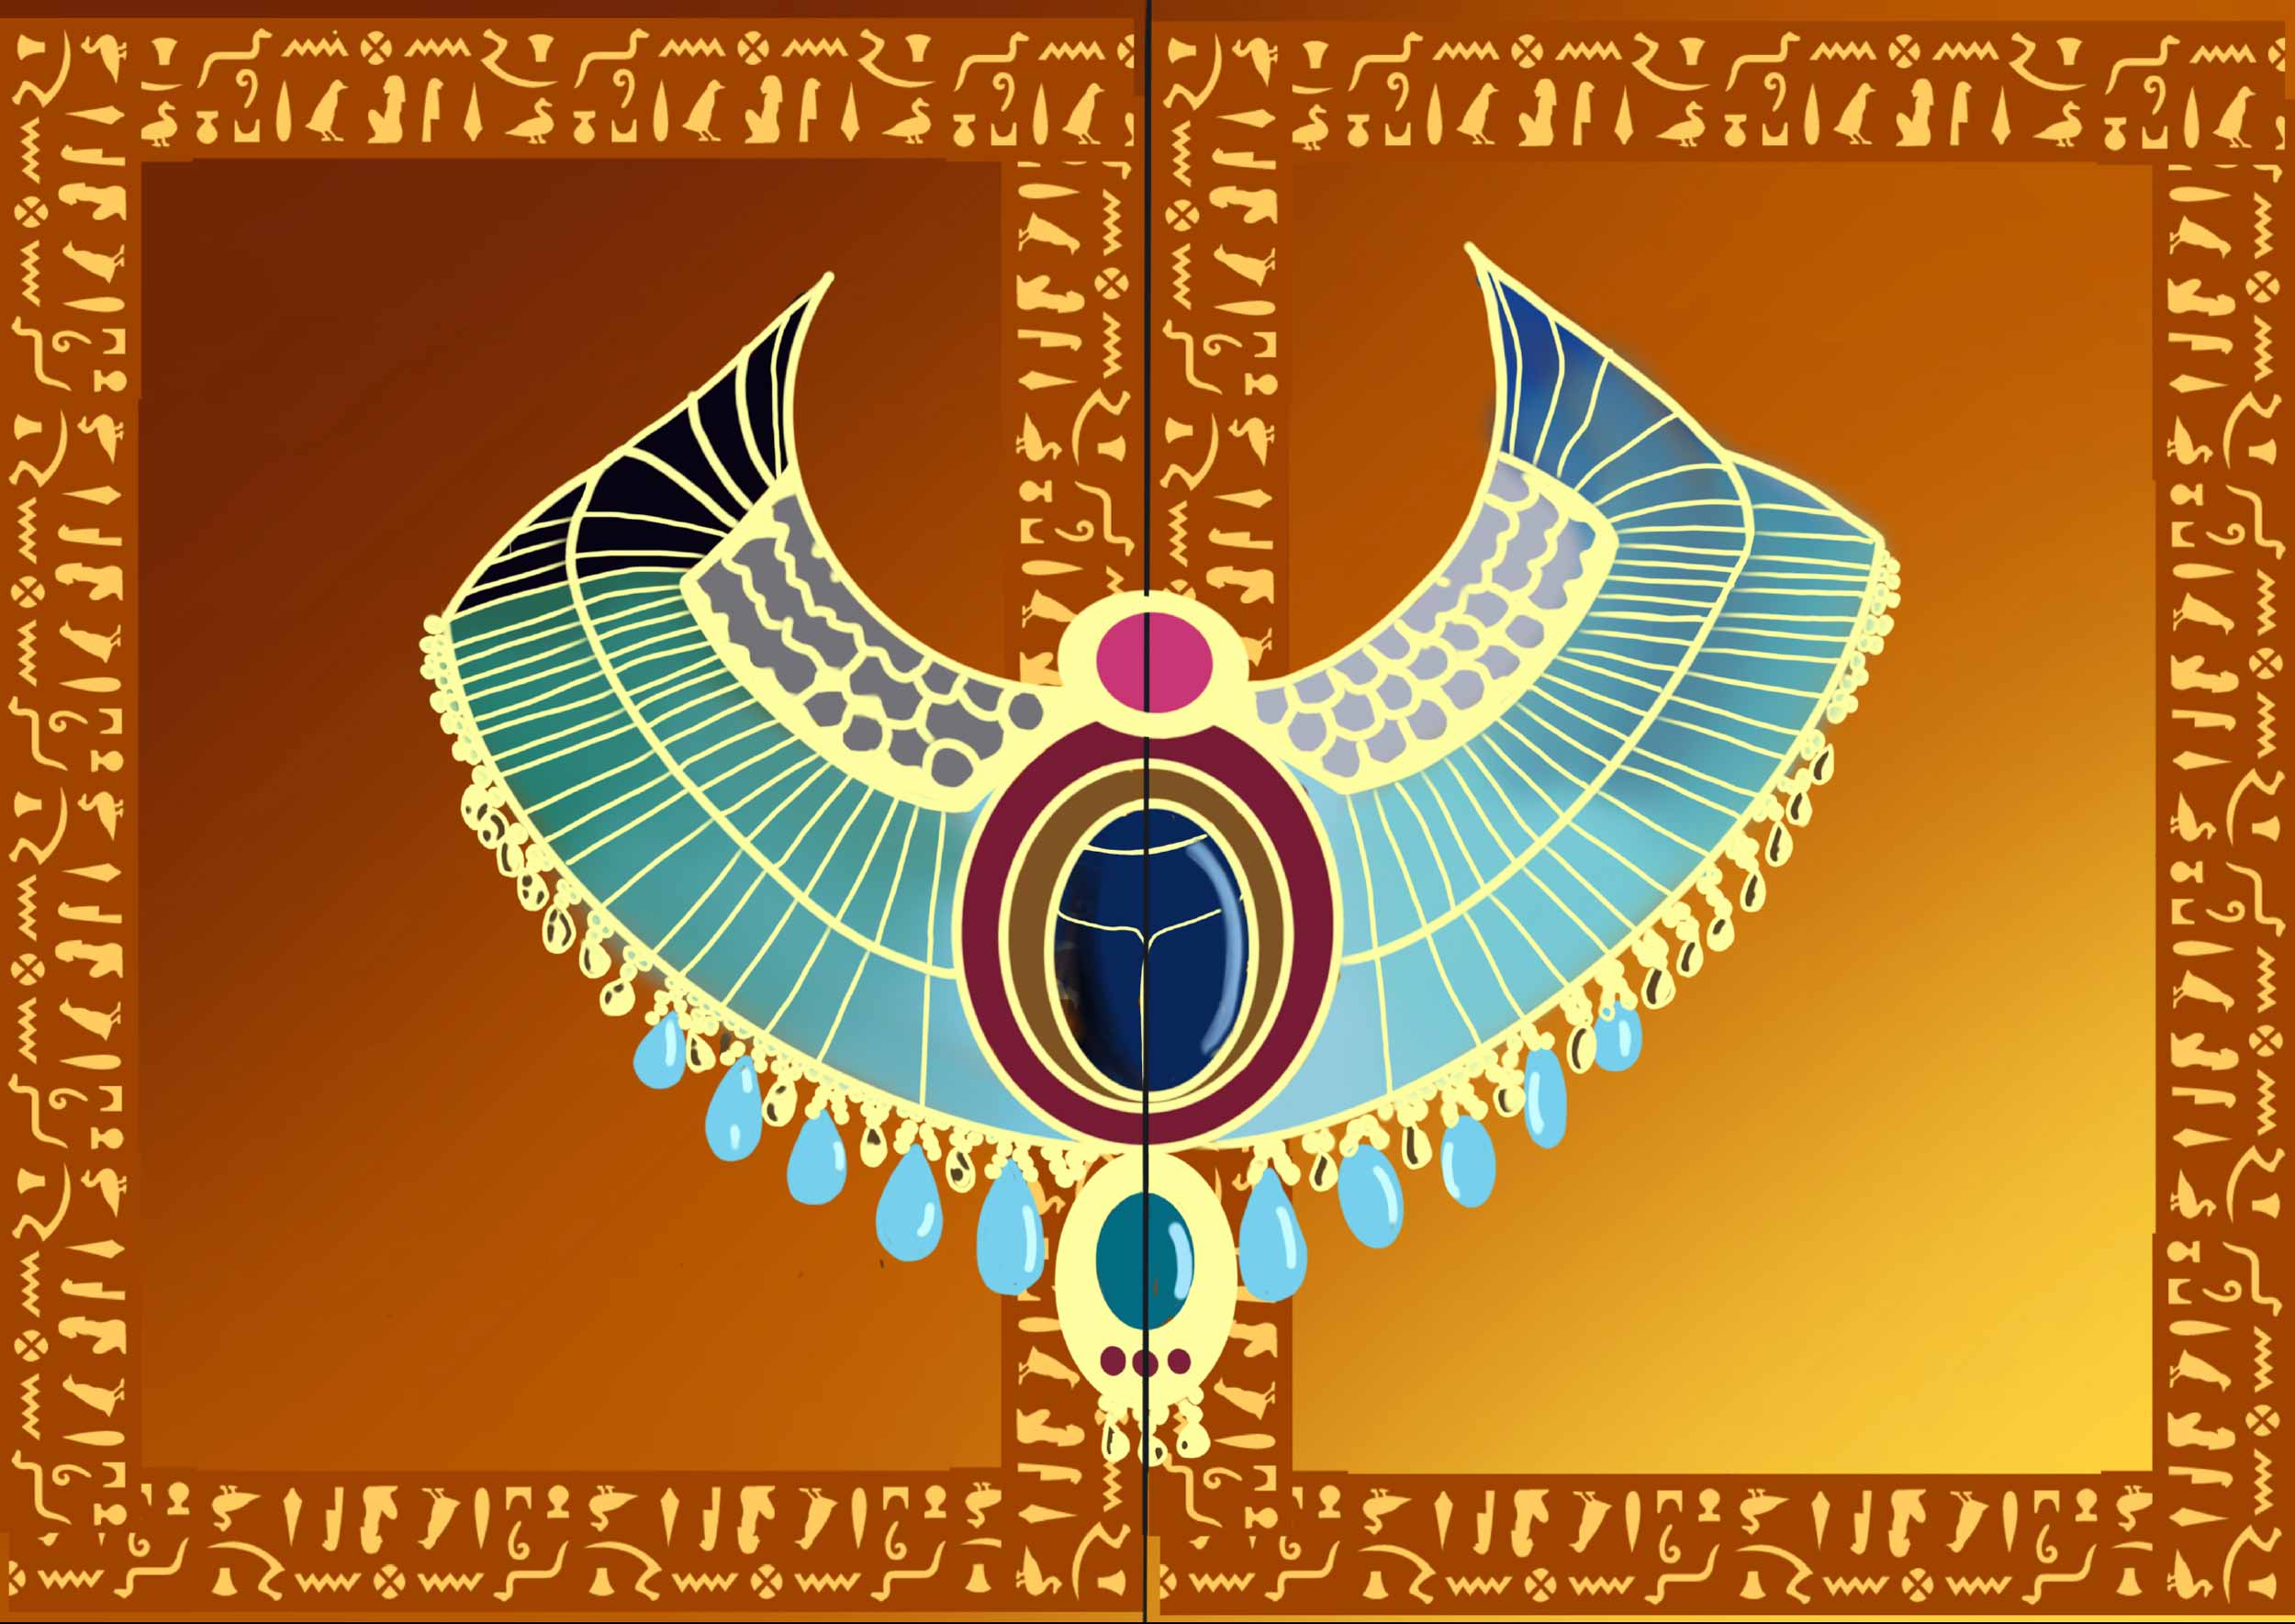 A digital illustration of a decorative blue and yellow Egyptian necklace. The background is a gradient of brown to yellow and feature hieroglyphics around the edge of the image.